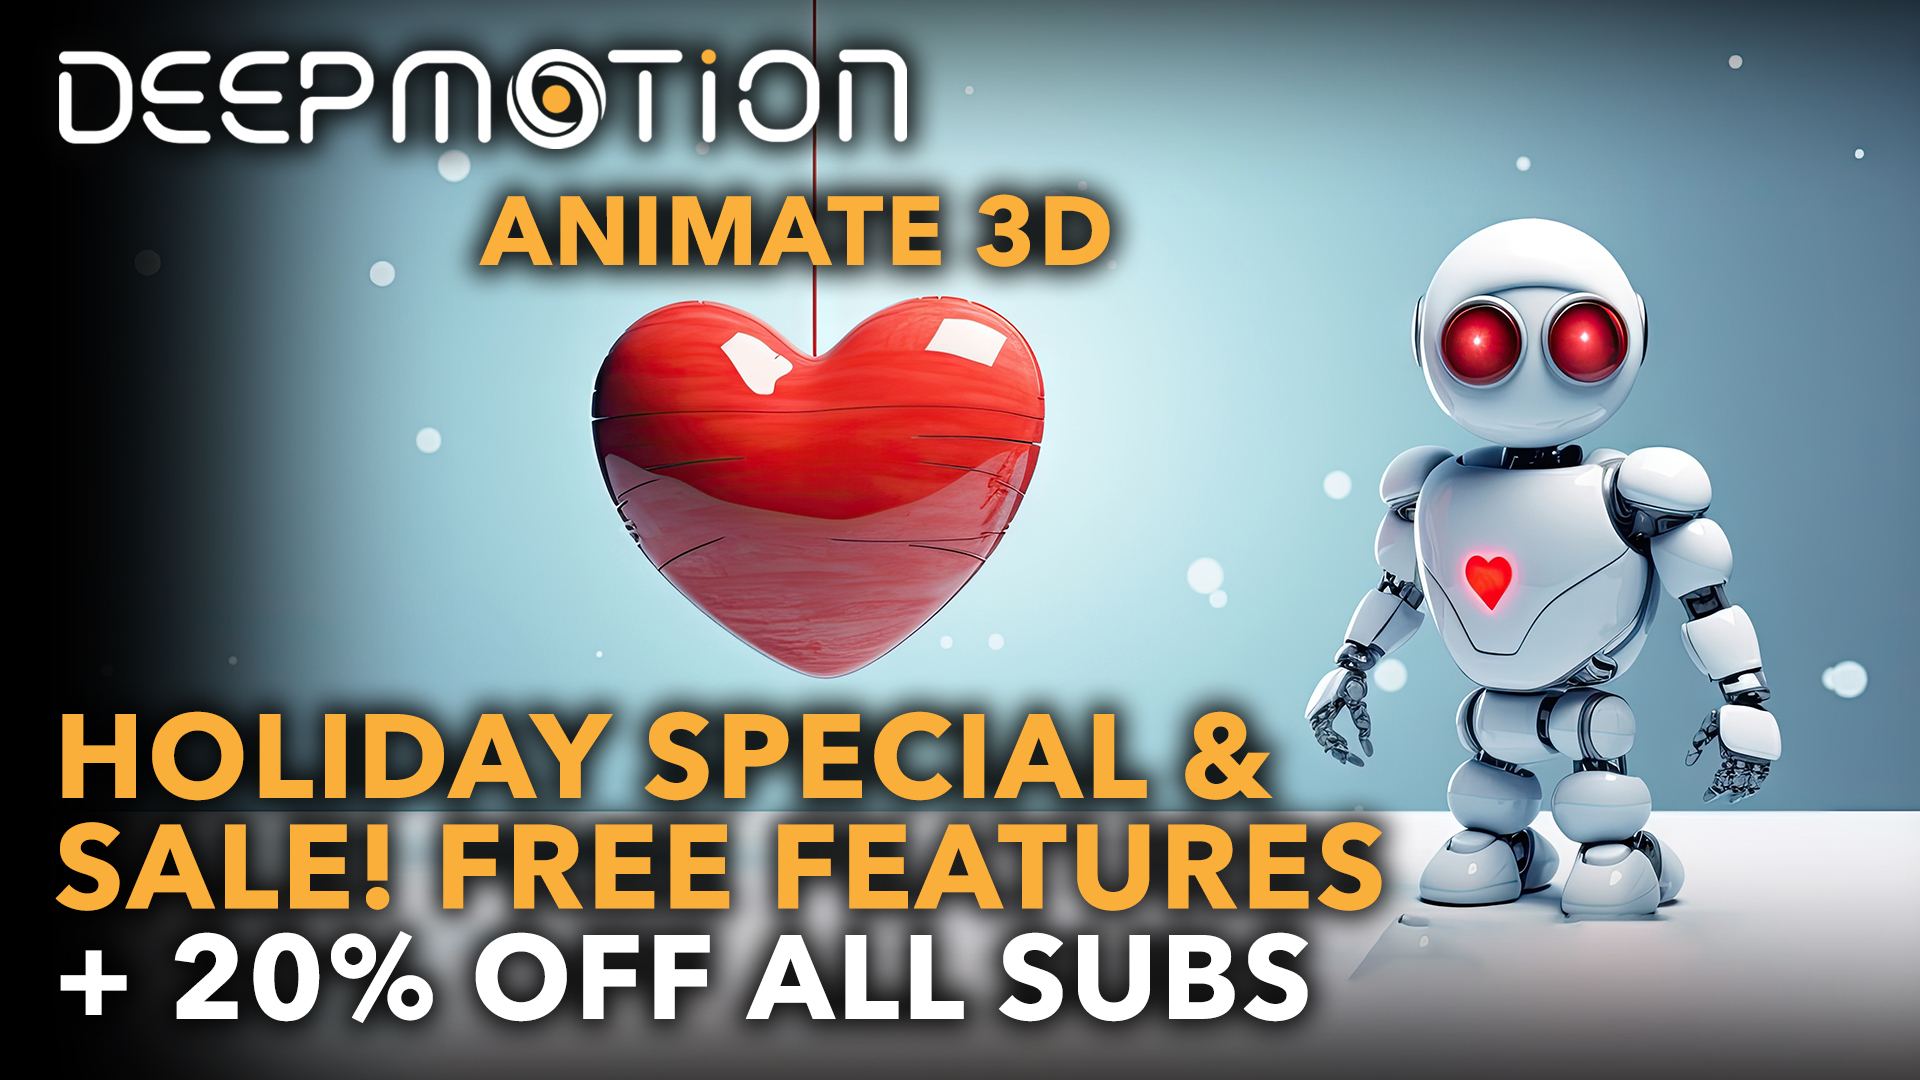 Free Unlocked Advanced Animation Features For All + Save 20% On All Subscriptions!